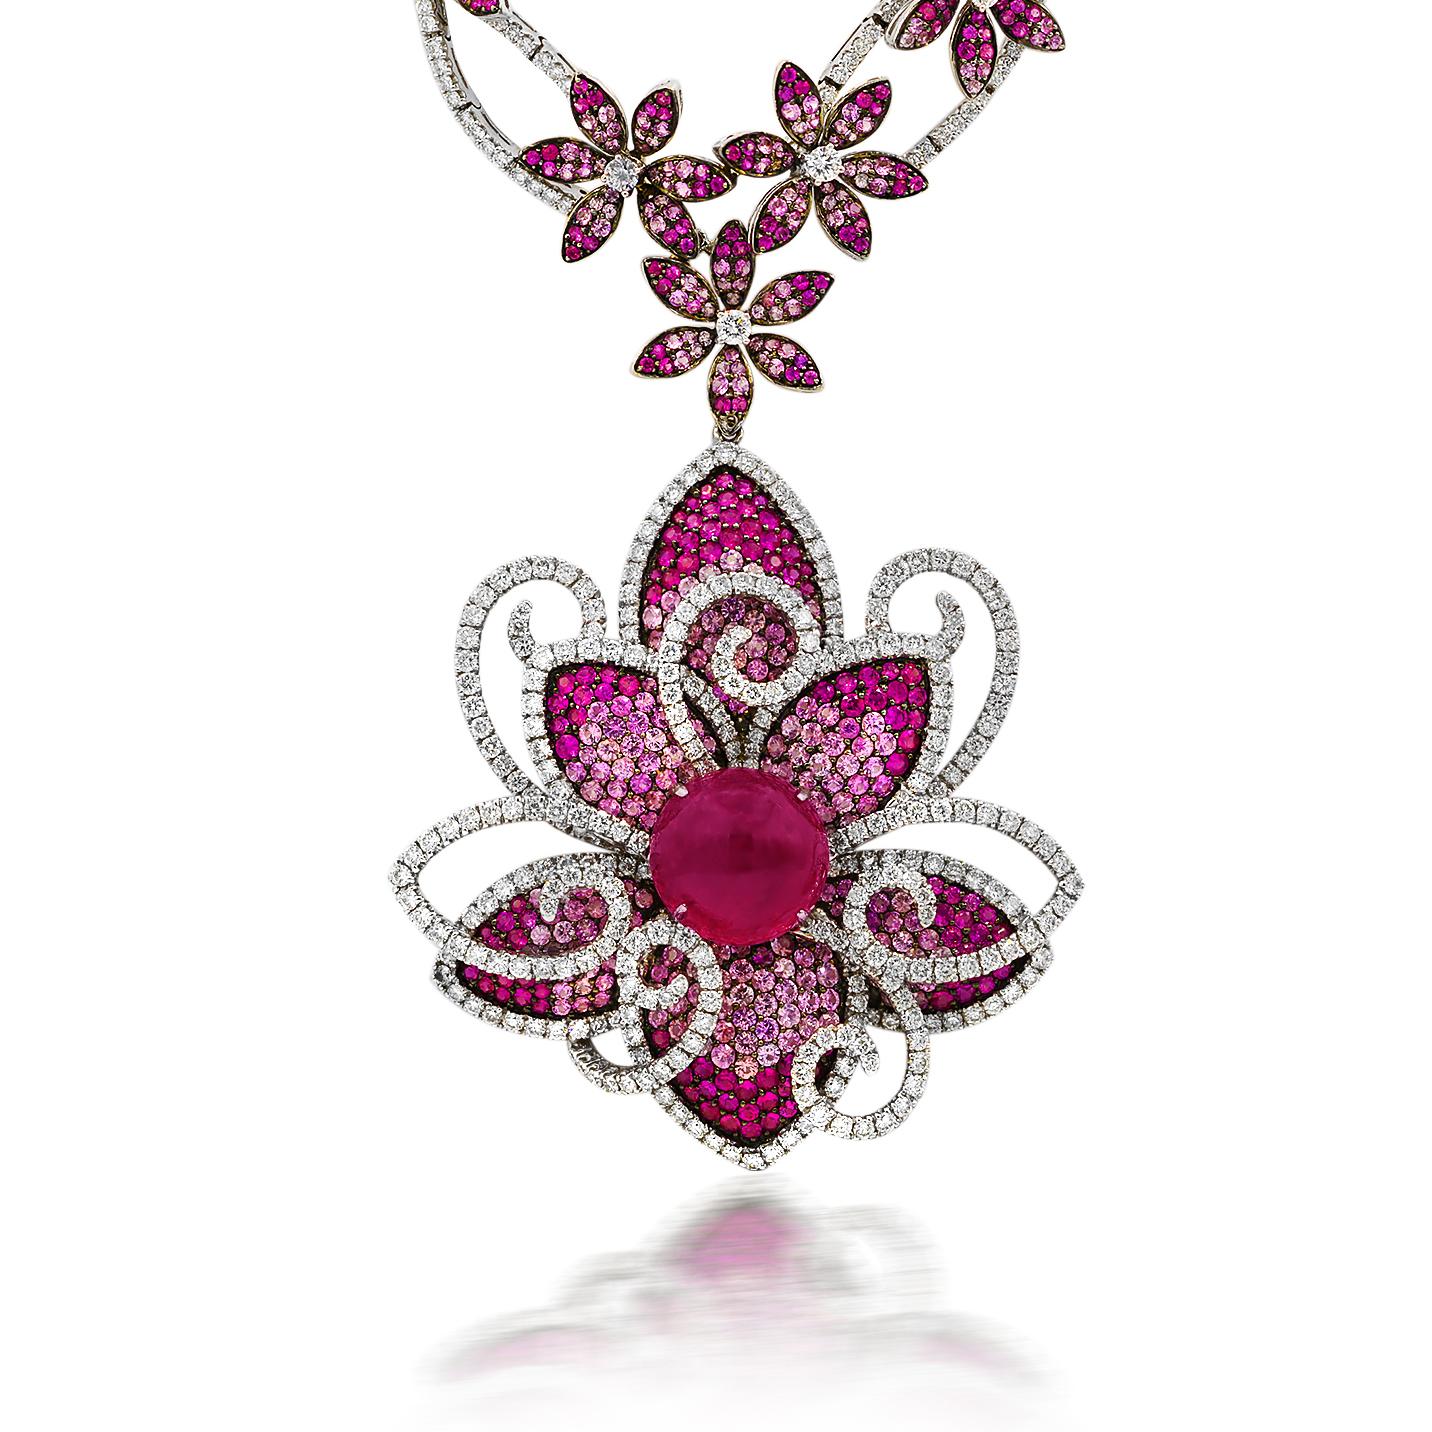 Brilliant Cut One of a Kind Rubellite, Sapphire and Diamond Necklace For Sale